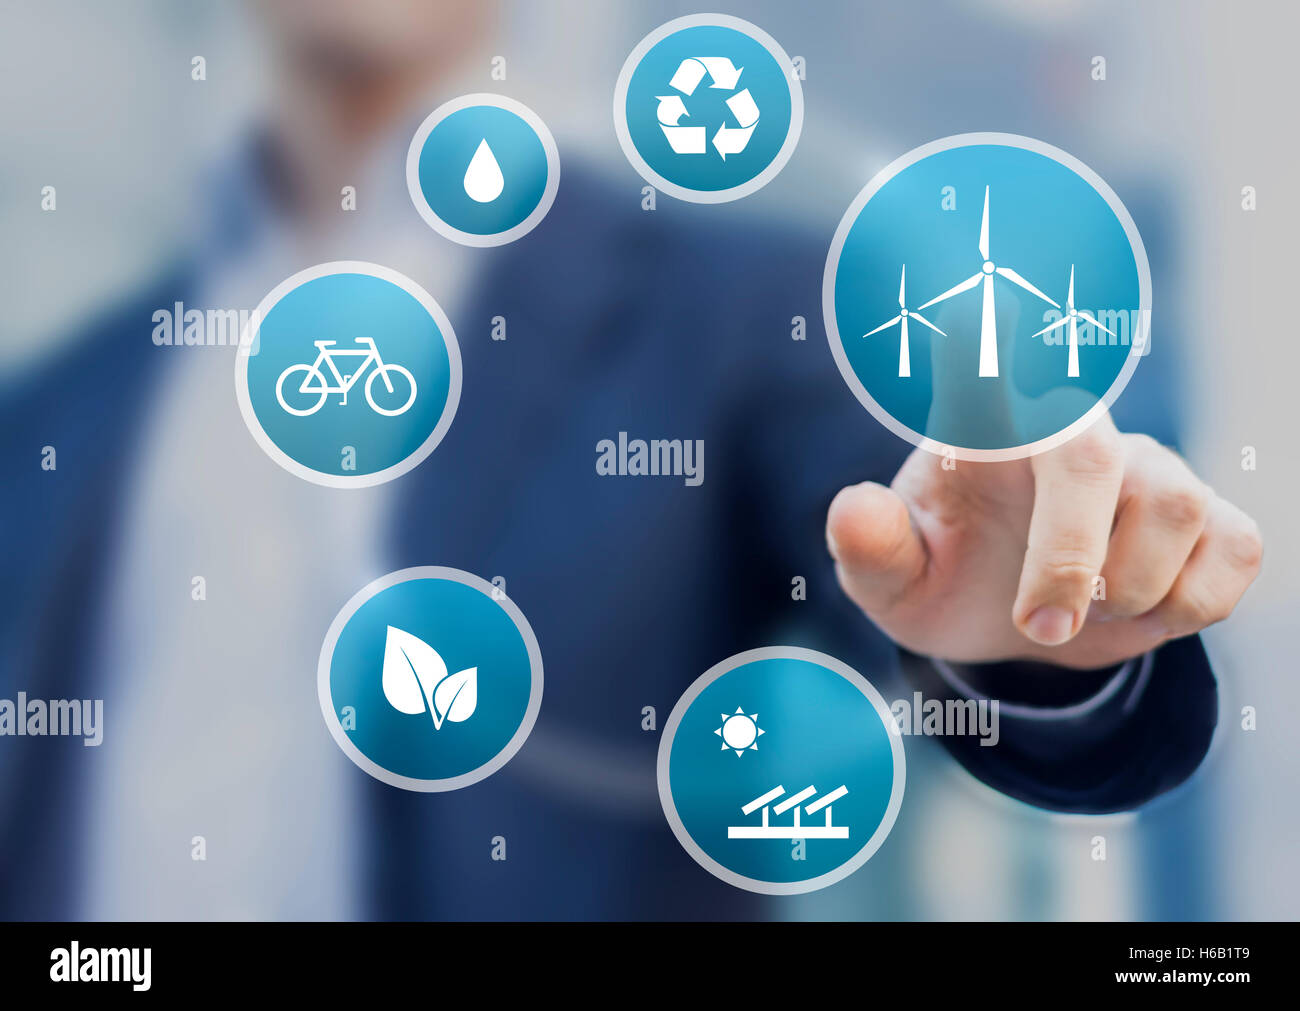 Presentation about renewable energy for a sustainable development with icons on virtual screen Stock Photo